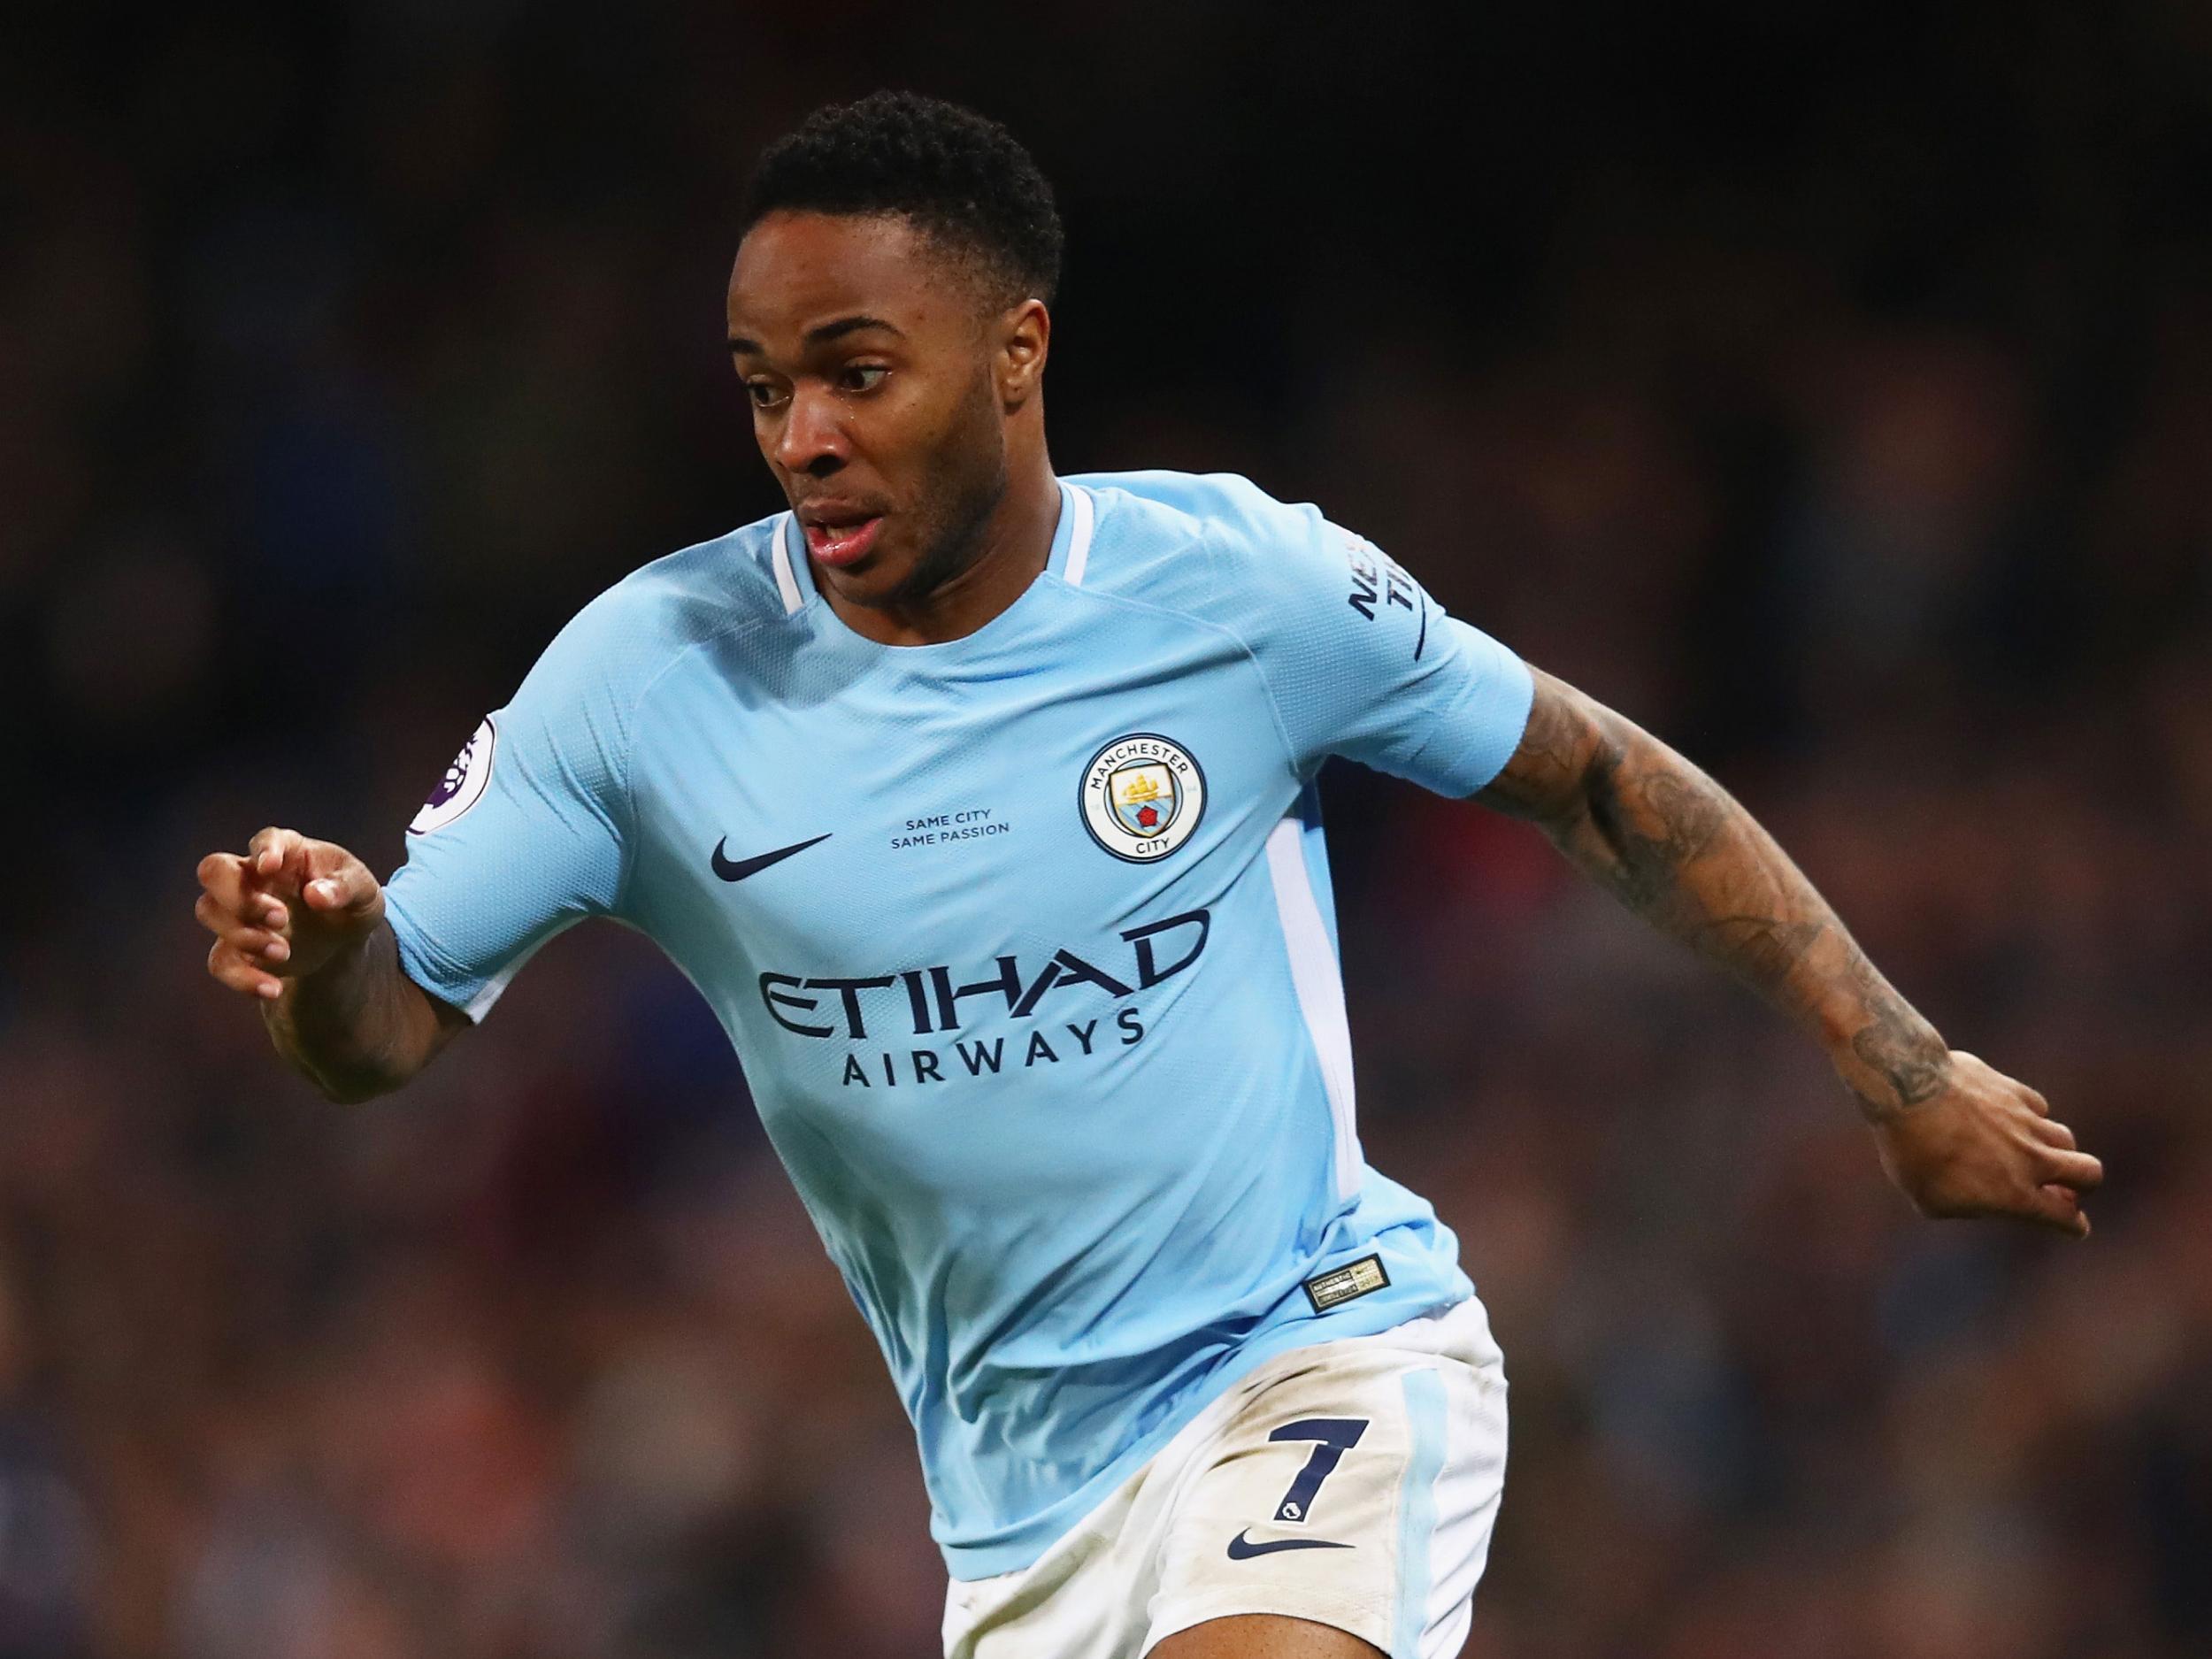 Manchester City want Raheem Sterling to stay and sign new Etihad contract, says Pep Guardiola